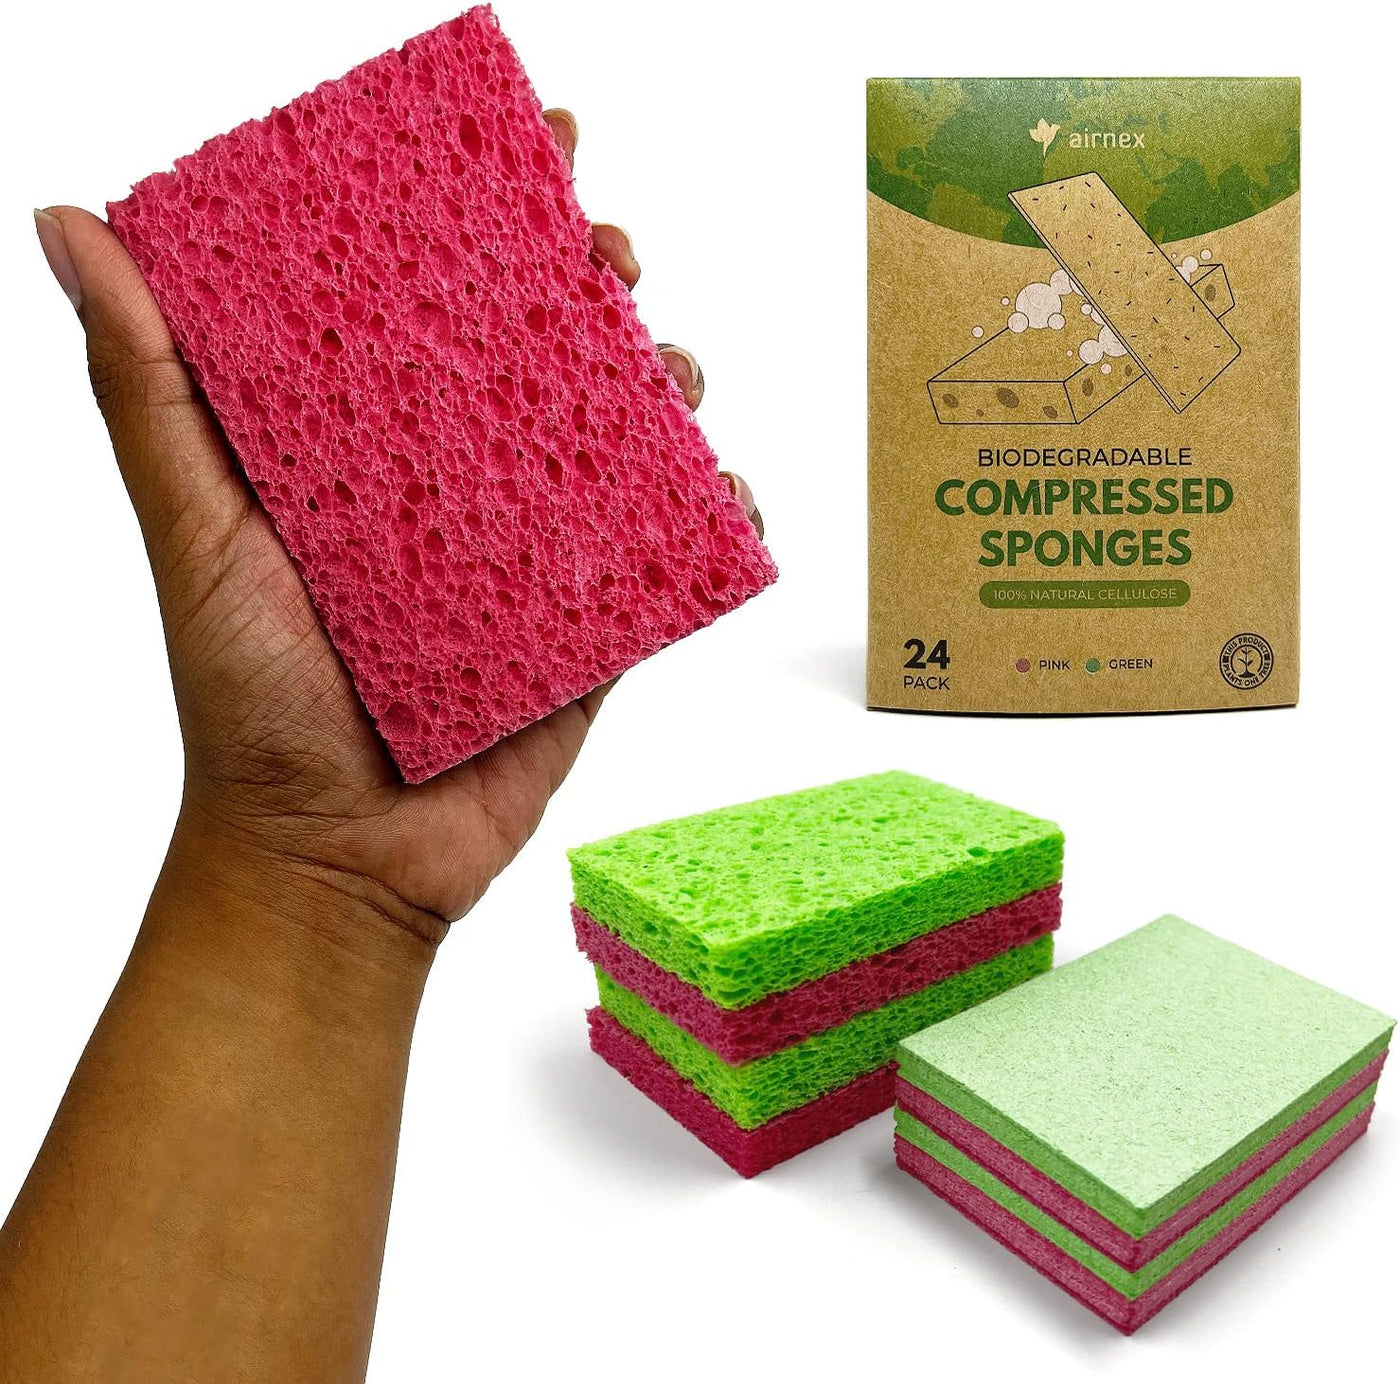 AIRNEX Biodegradable Cellulose Compressed Sponges - Kitchen Sponges for Cleaning - Heavy Duty and Natural Multipurpose Household Cleaning Sponges Good for Kitchen, Bathroom, and Surfaces